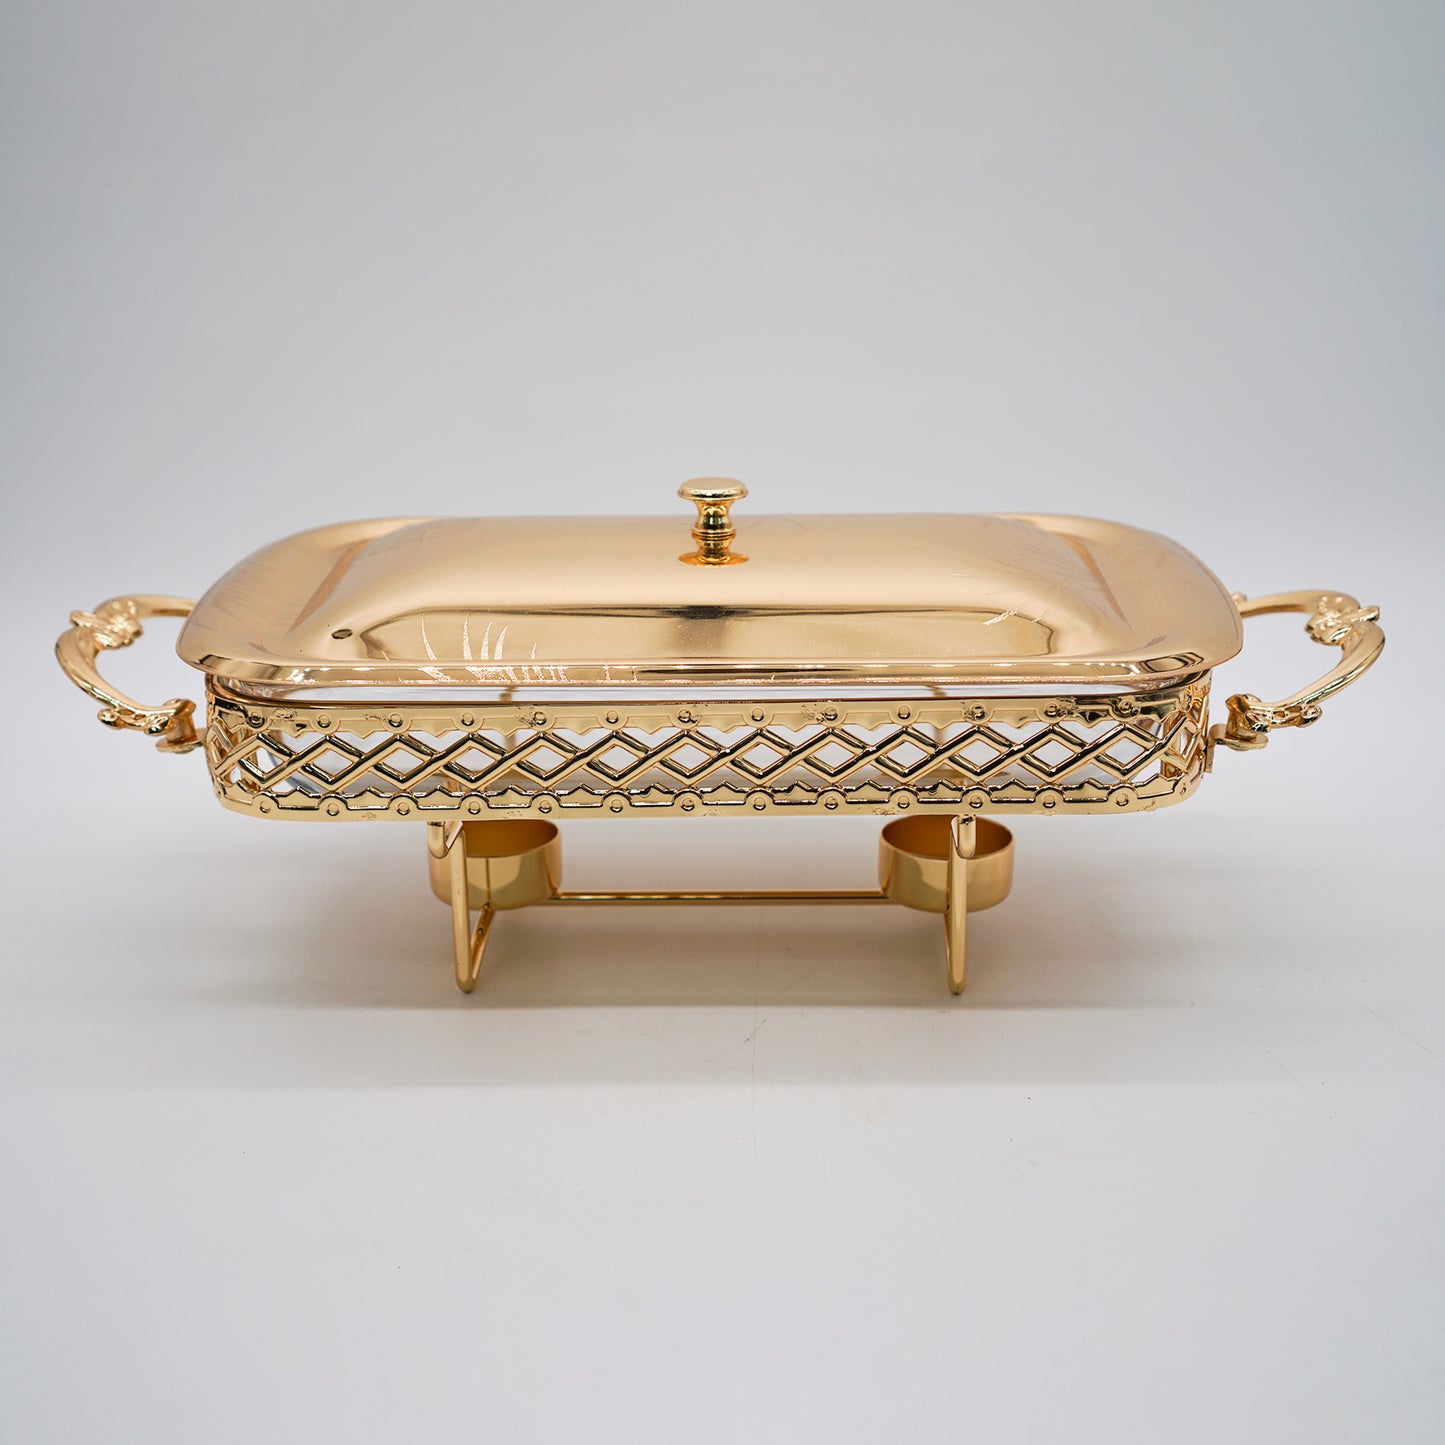 Luxury Golden Square Dish, Food Warmer, Stainless Steel Glass Serving Dish, Buffet Hot Pot Chafing Dish